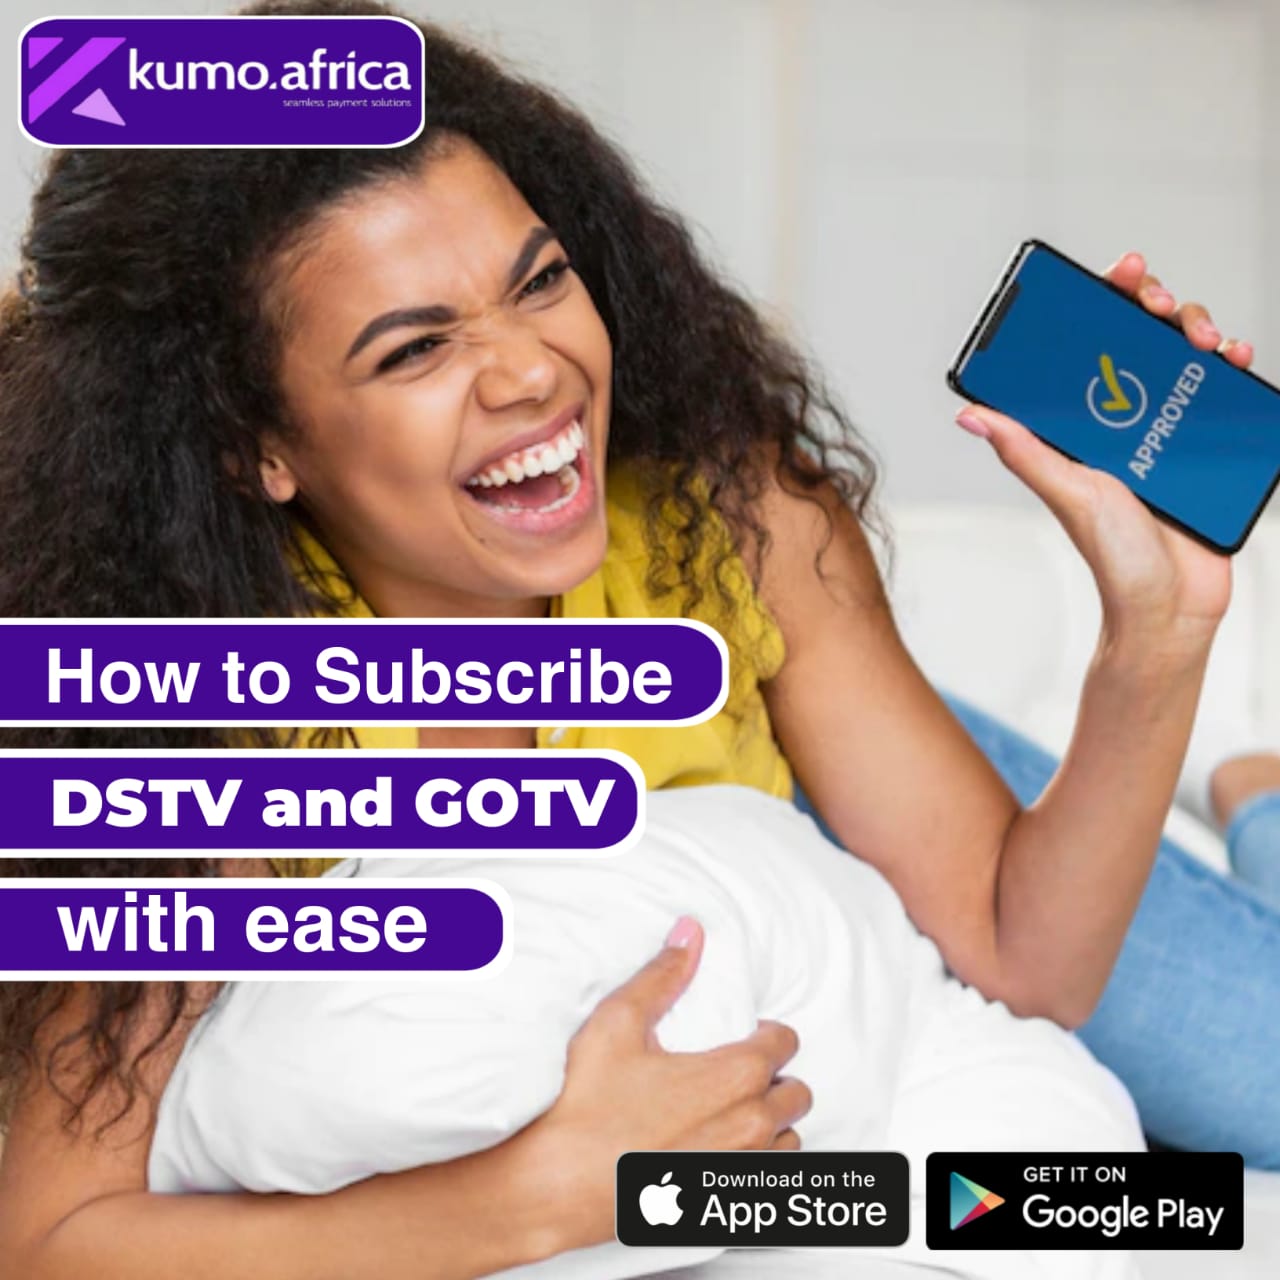 How to subscribe DSTV and GOTV